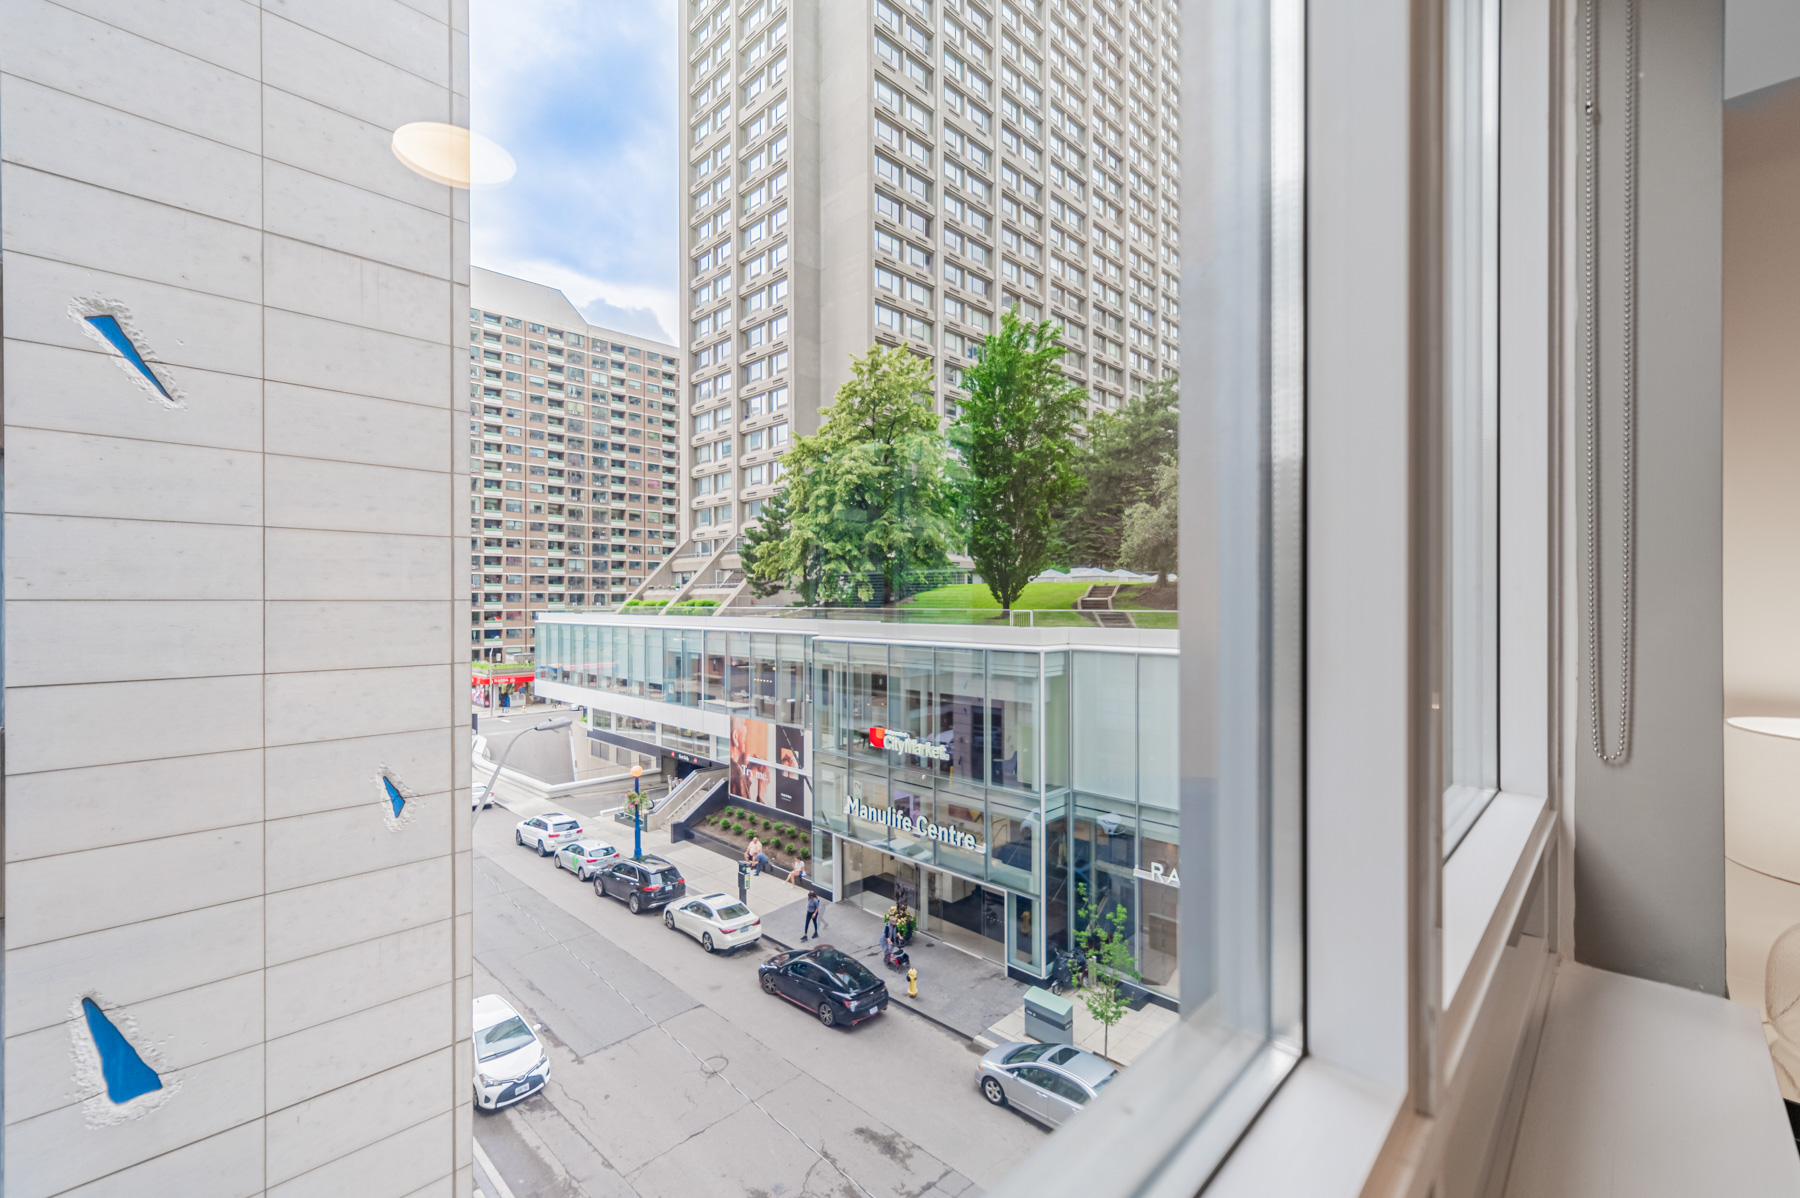 View of Manulife Centre Mall from window of 35 Balmuto St Unit 401 bedroom.